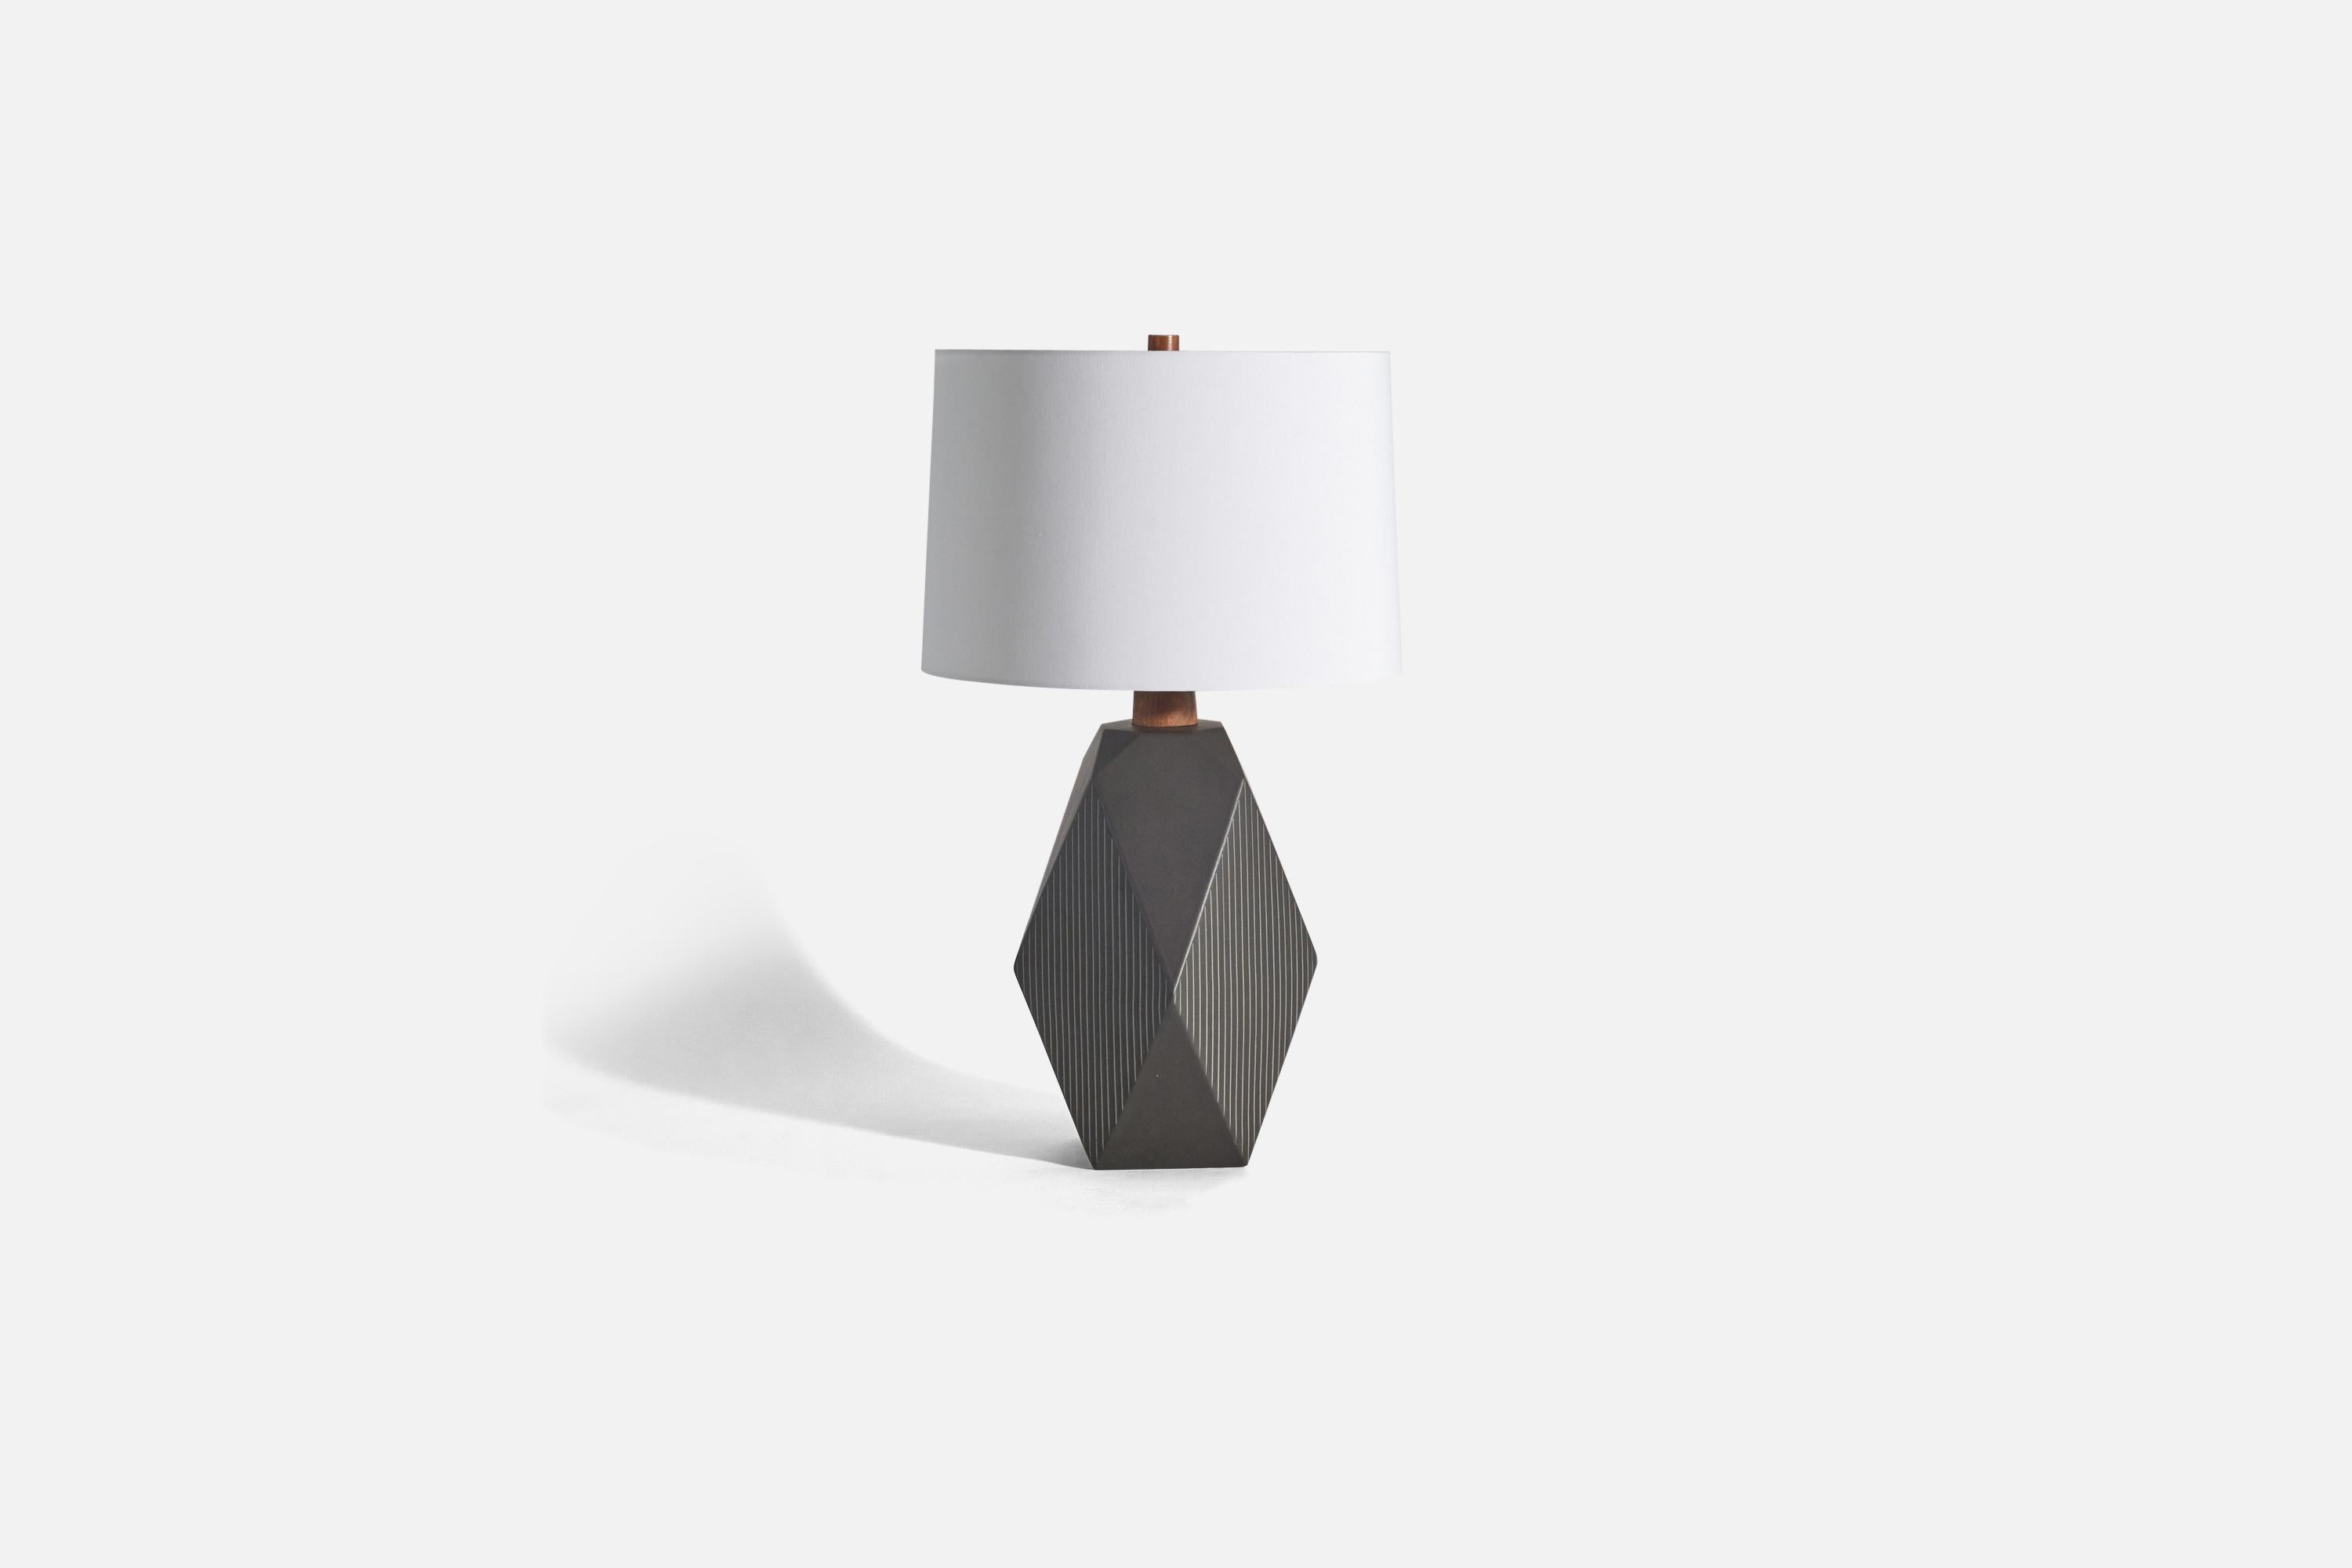 A black ceramic and wood table lamp designed by Jane & Gordon Martz and produced by Marshall Studios, Indianapolis, United States, 1960s.

Sold without lampshade(s)
Dimensions of lamp (inches) : 23.54 x 11.81 x 12 (height x width x